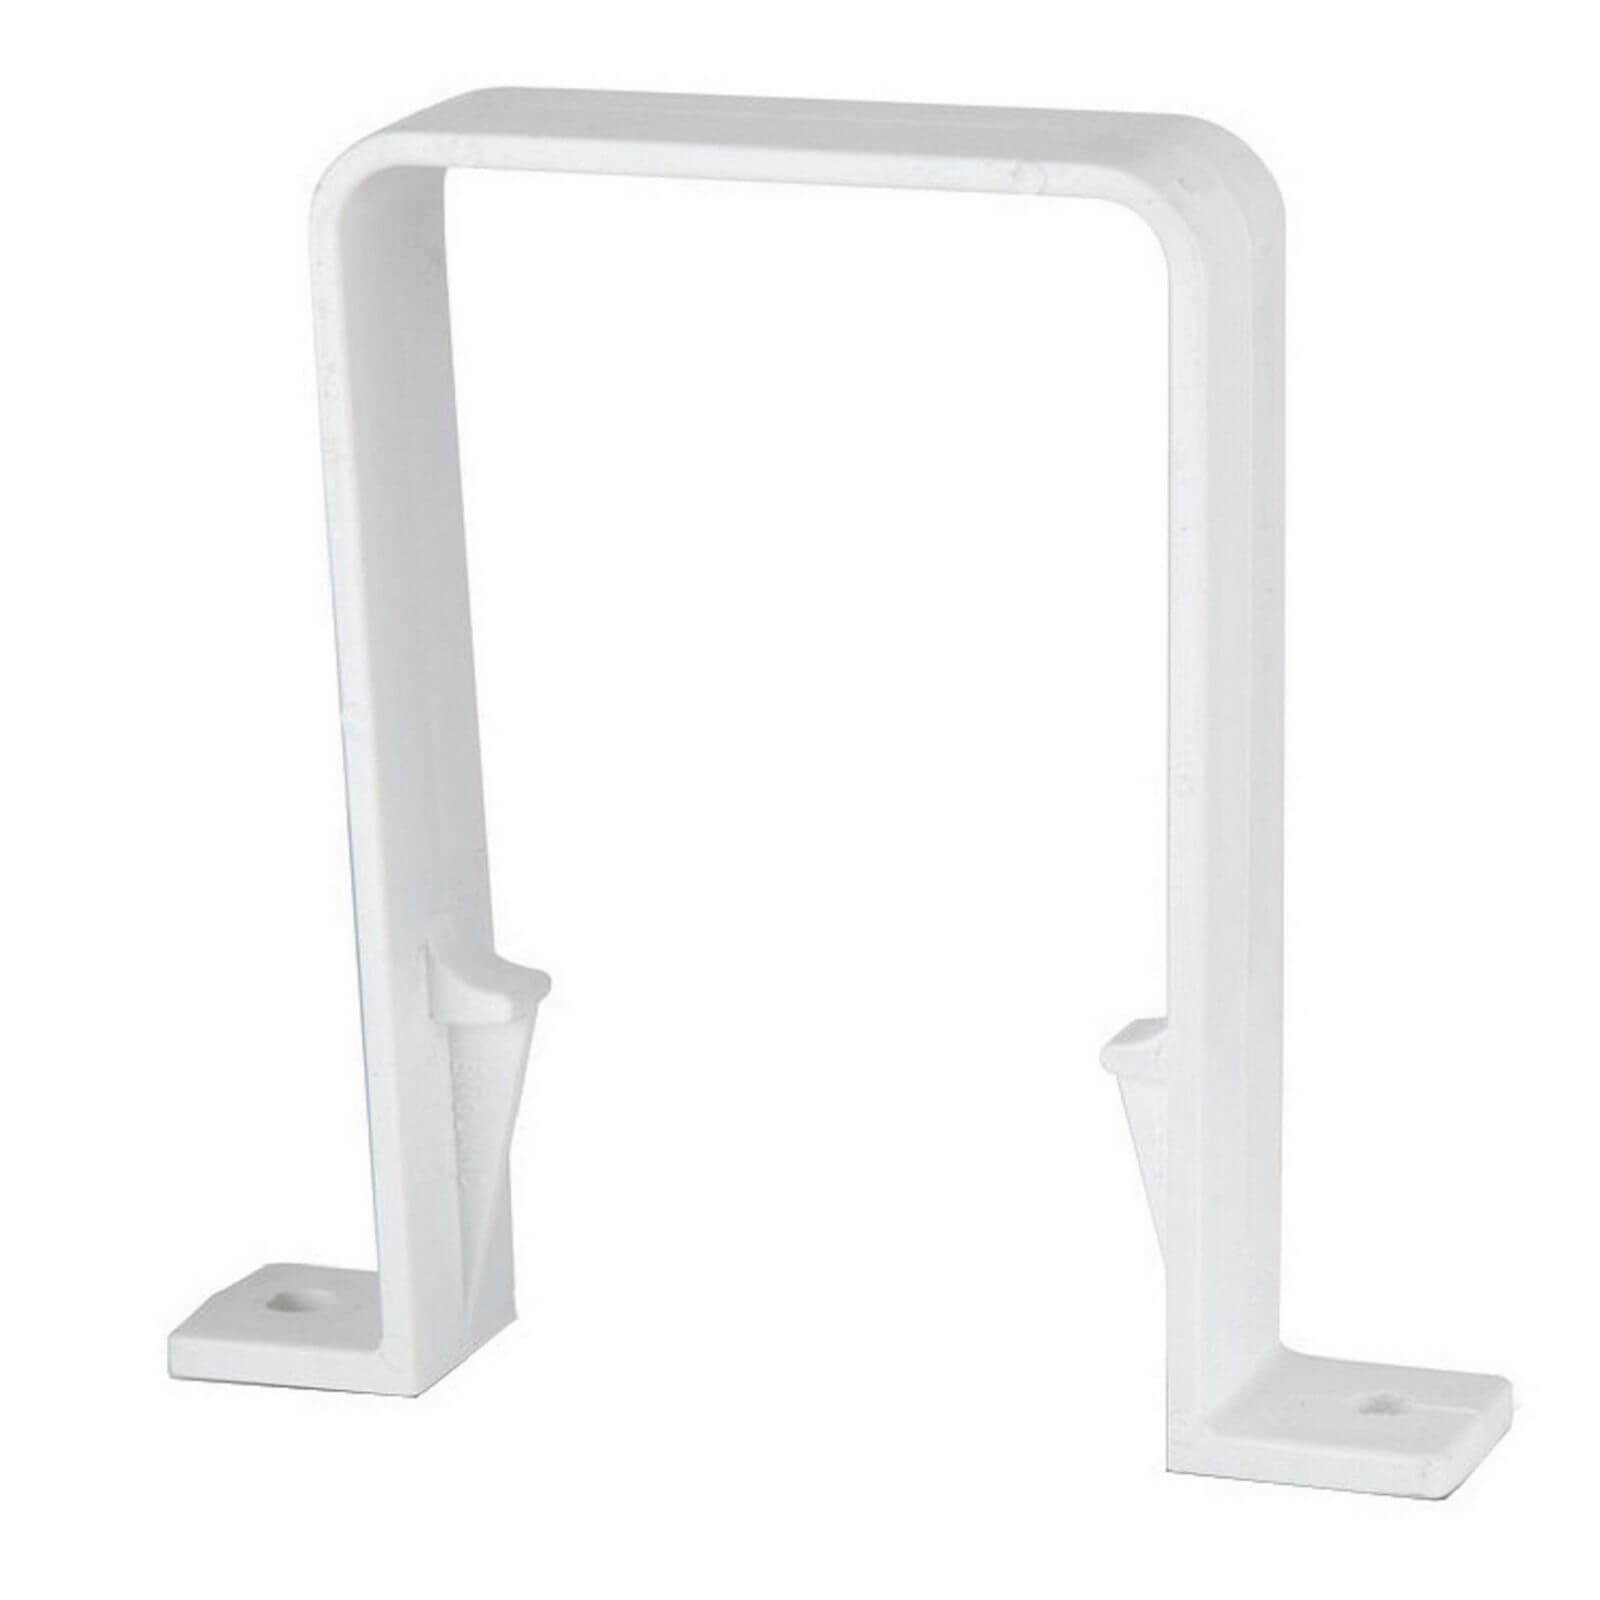 Polypipe Square Downpipe Bracket - 65mm - White